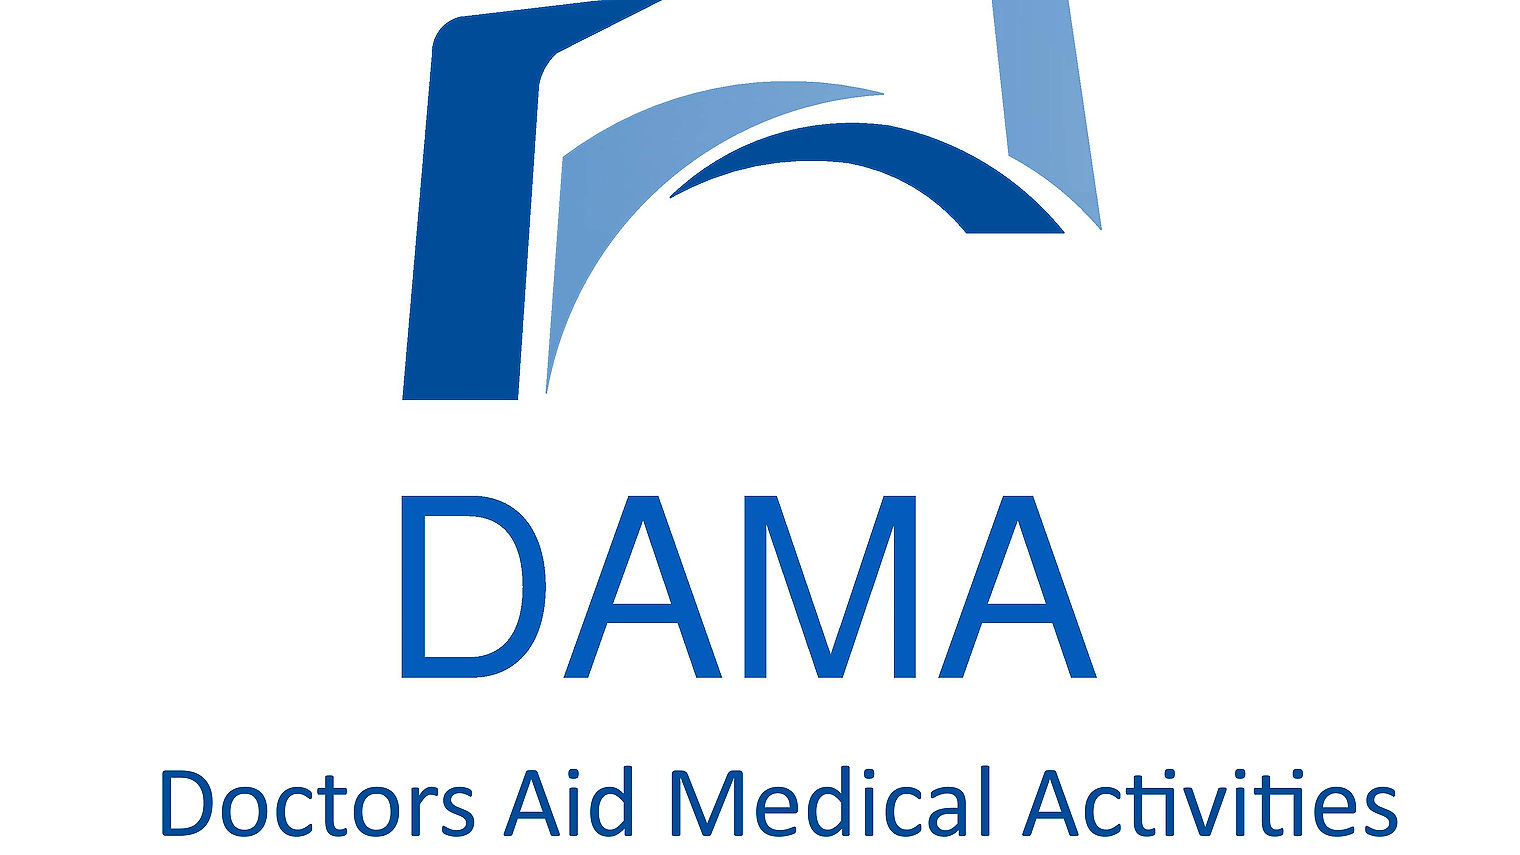 DAMA - Doctors Aid for Medical Activities